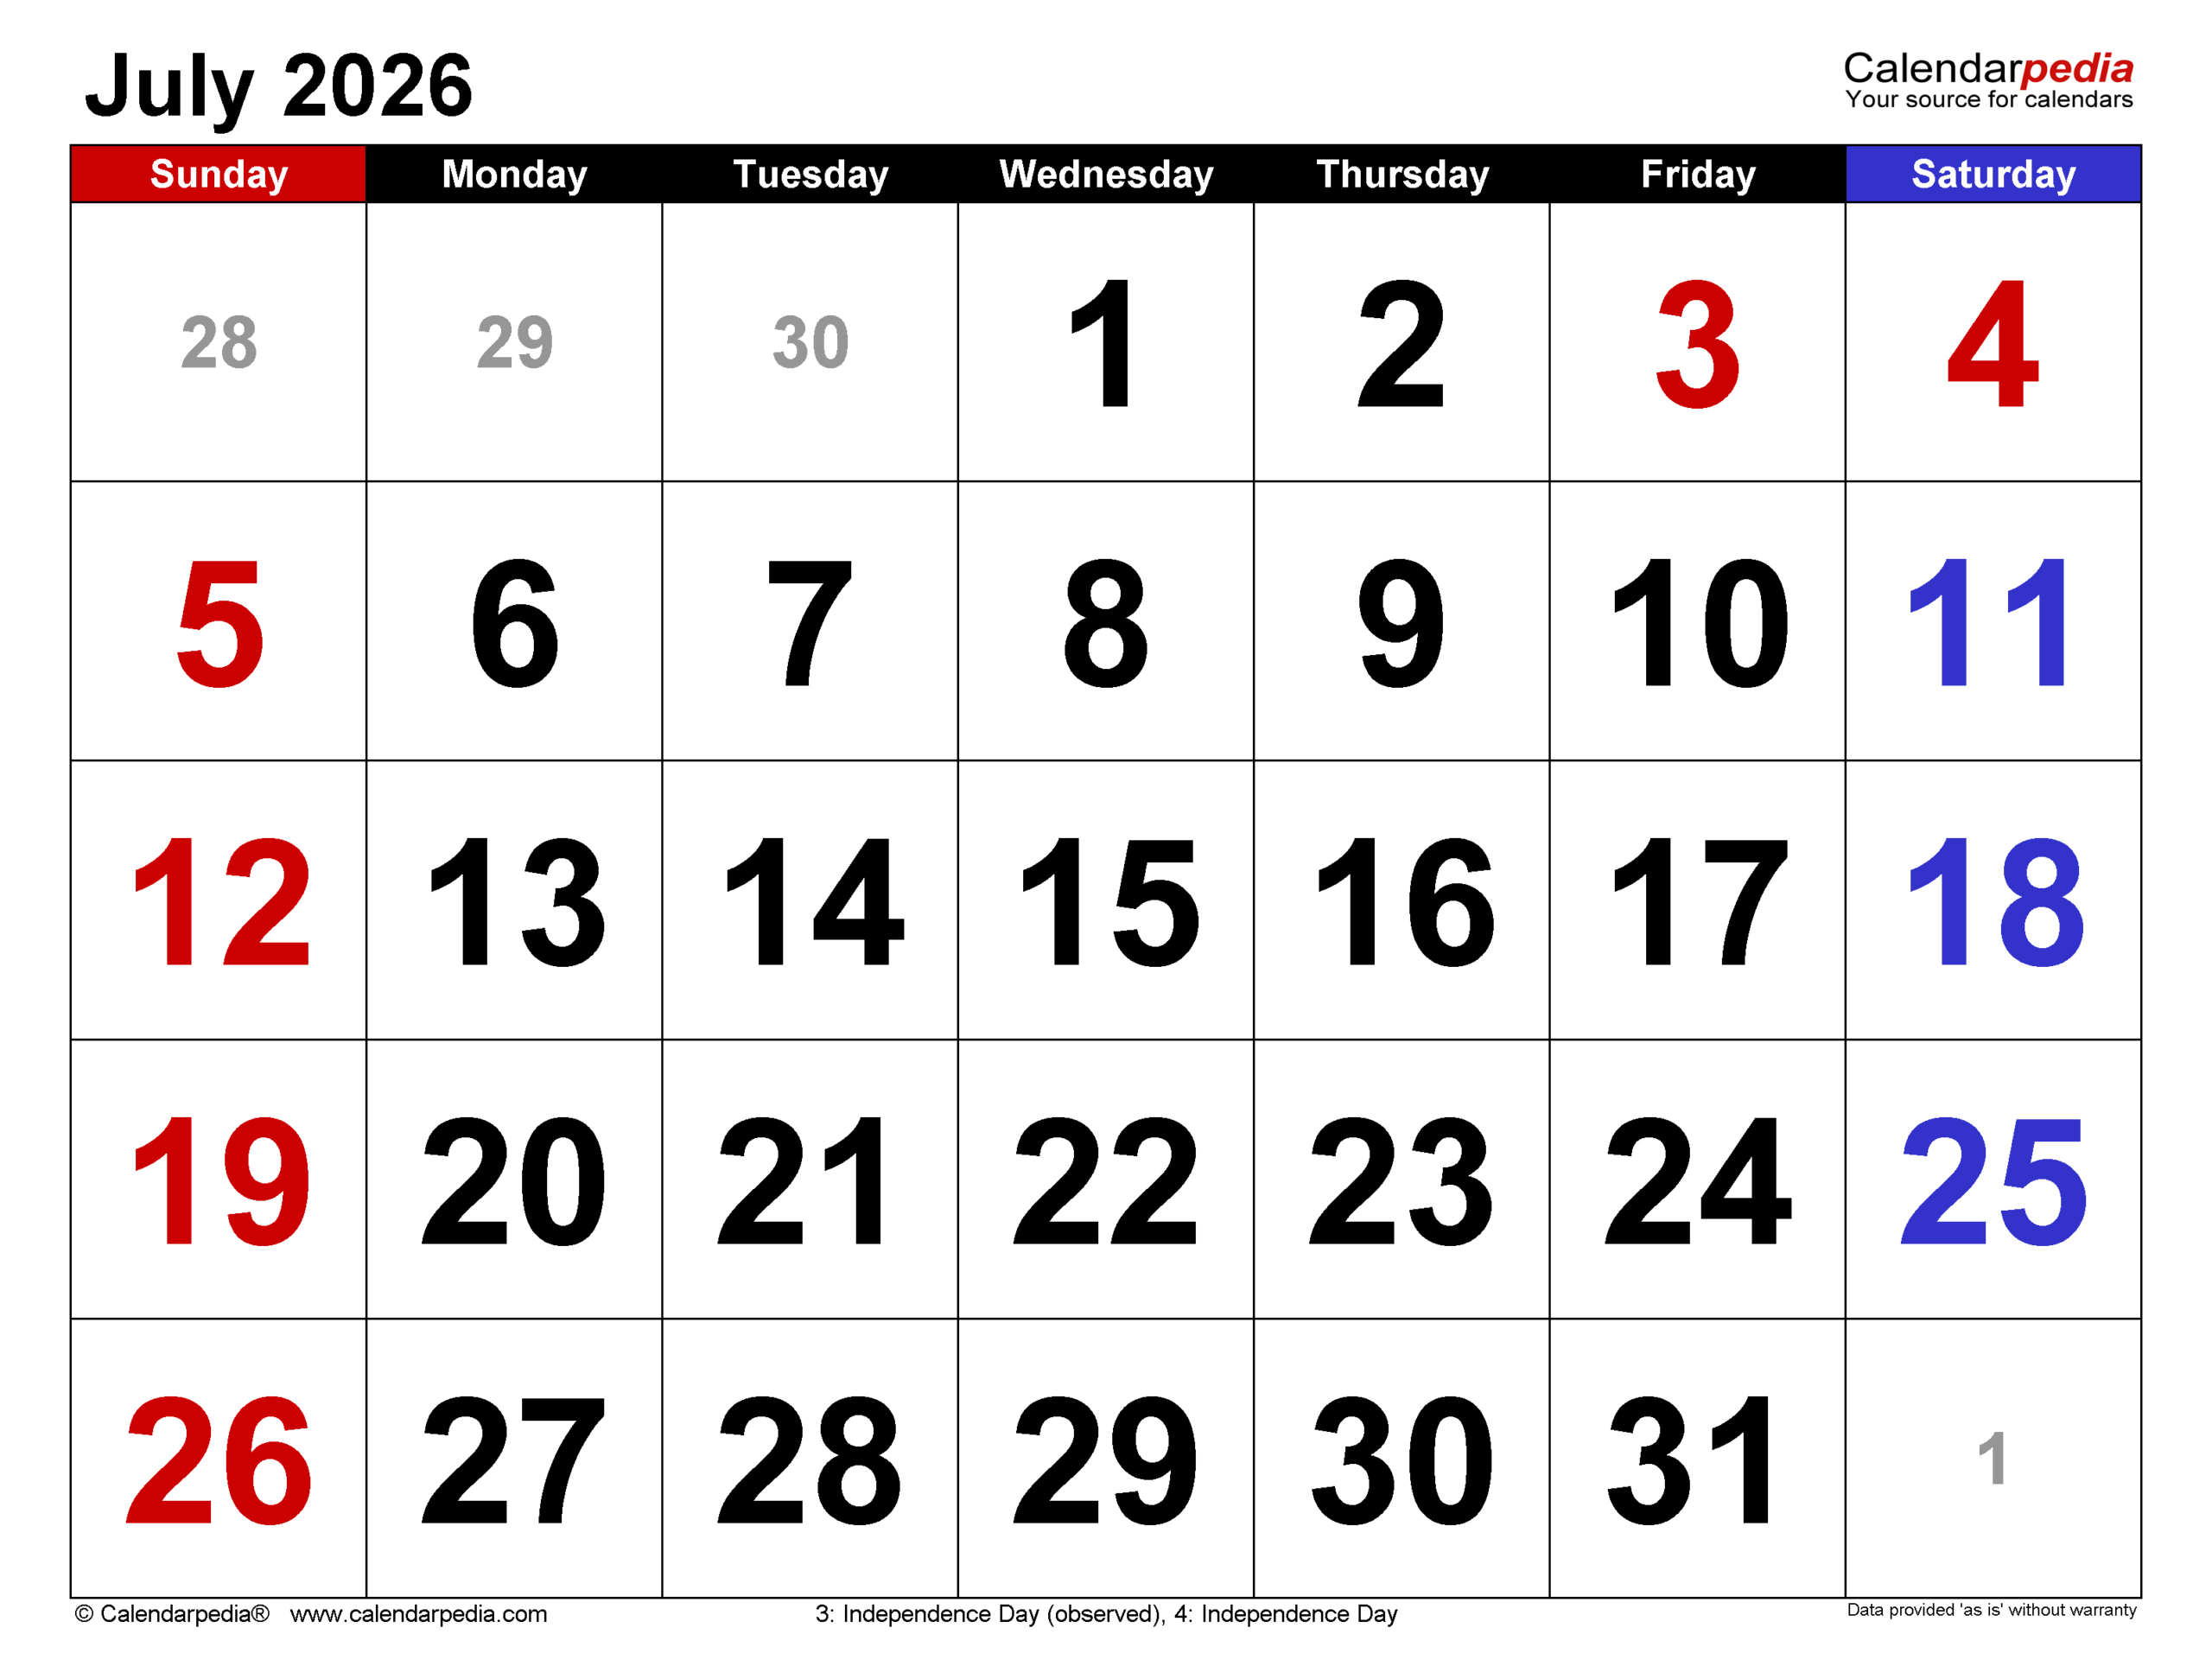 July 2026 Calendar | Templates For Word, Excel And Pdf in Calendar For July 2026